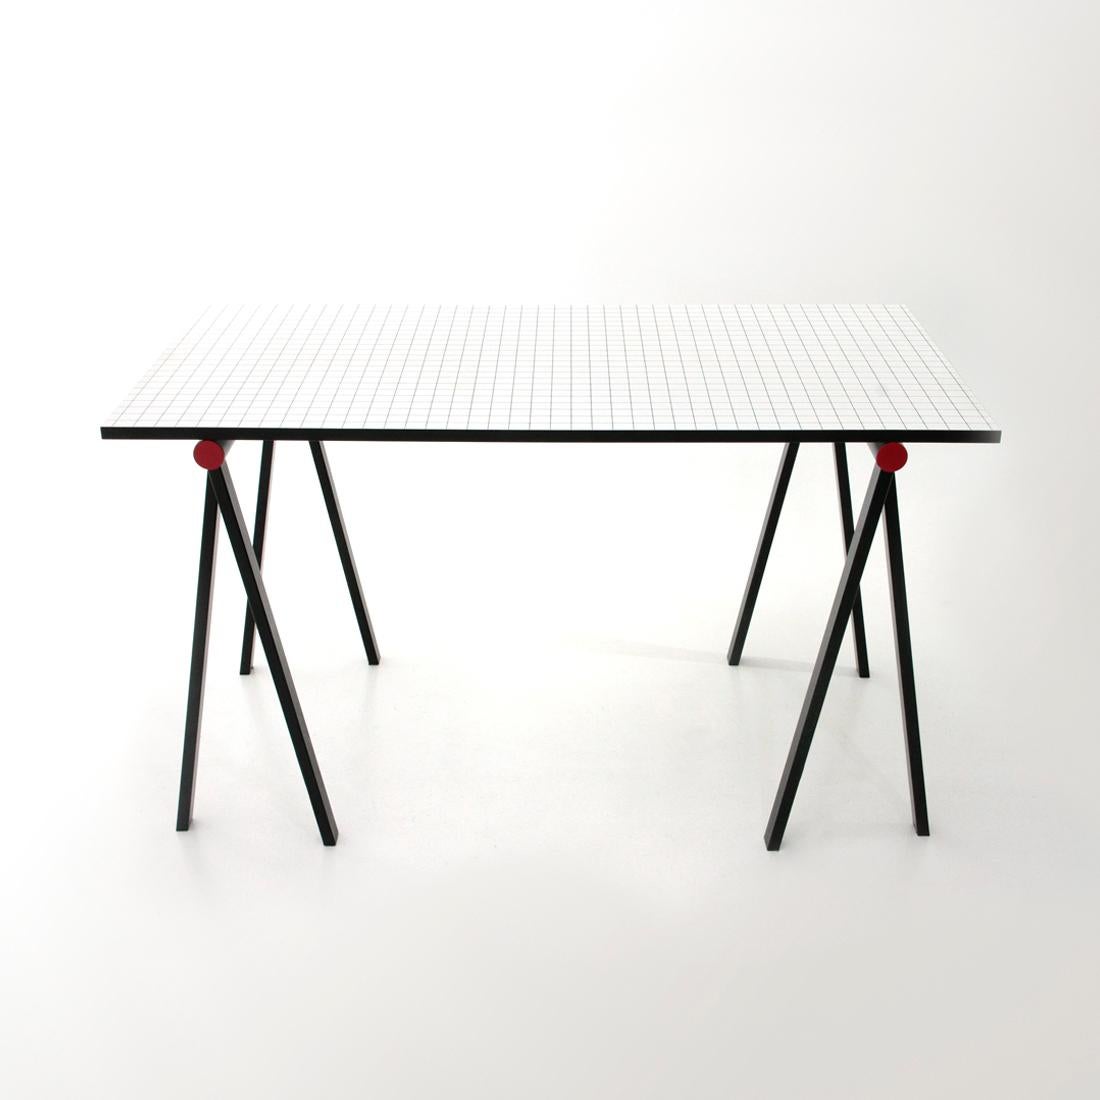 Table produced by Bieffeplast in the 1980s based on a design by Rodney Kinsman.
Legs in black painted metal with red plastic caps.
Wooden top with white laminate surface with black mesh.
Good general conditions, some signs due to normal use over